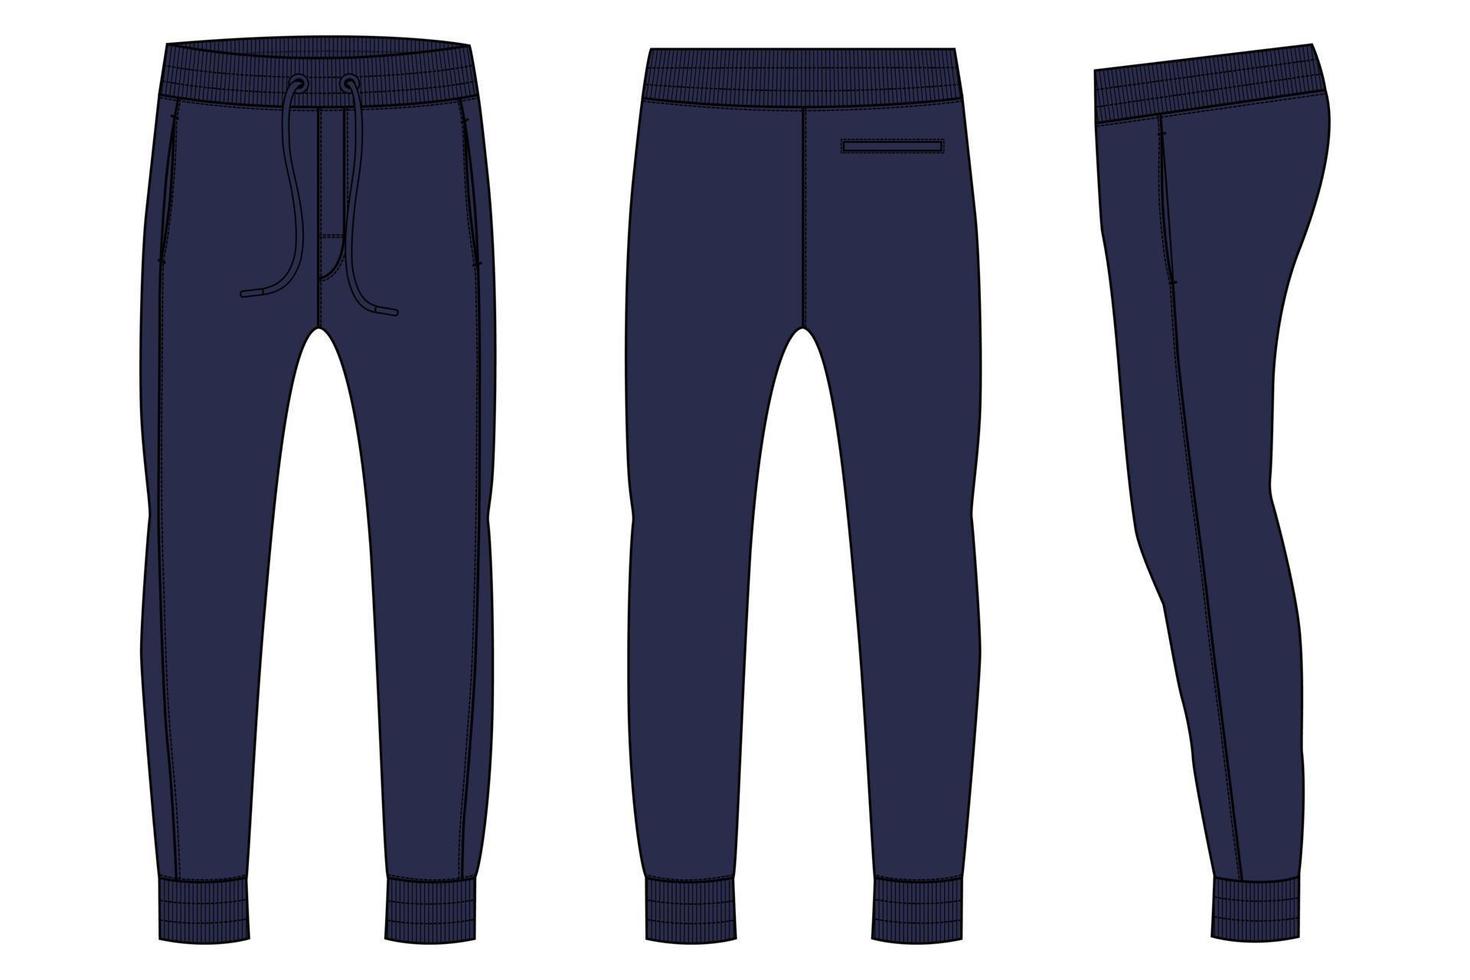 Fleece fabric Jogger Sweatpants technical fashion Flat sketch vector illustration template front and back views.